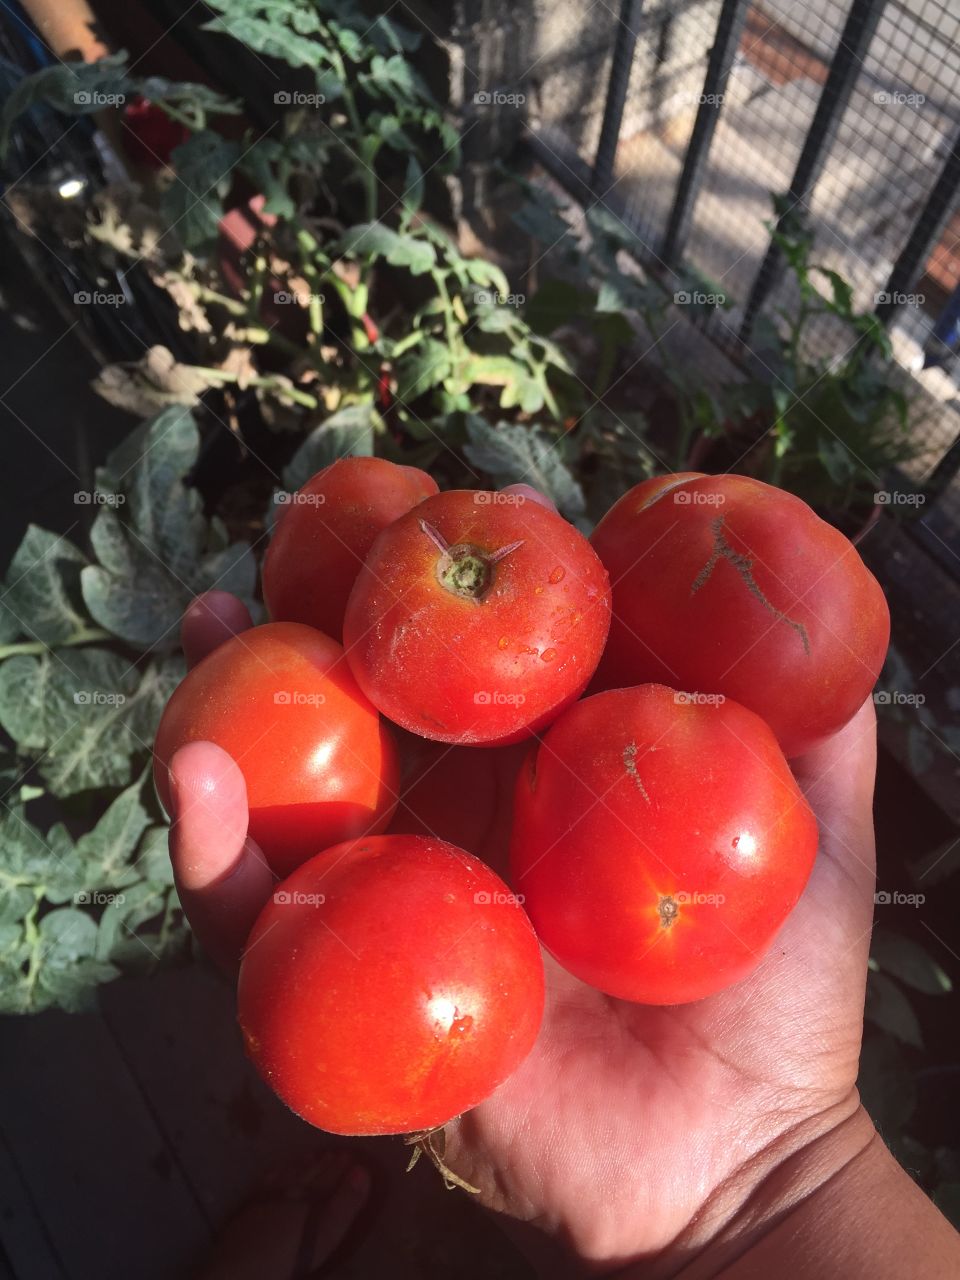 Urban garden. I grow veggies on my balcony in nyc and this was my first big harvest.